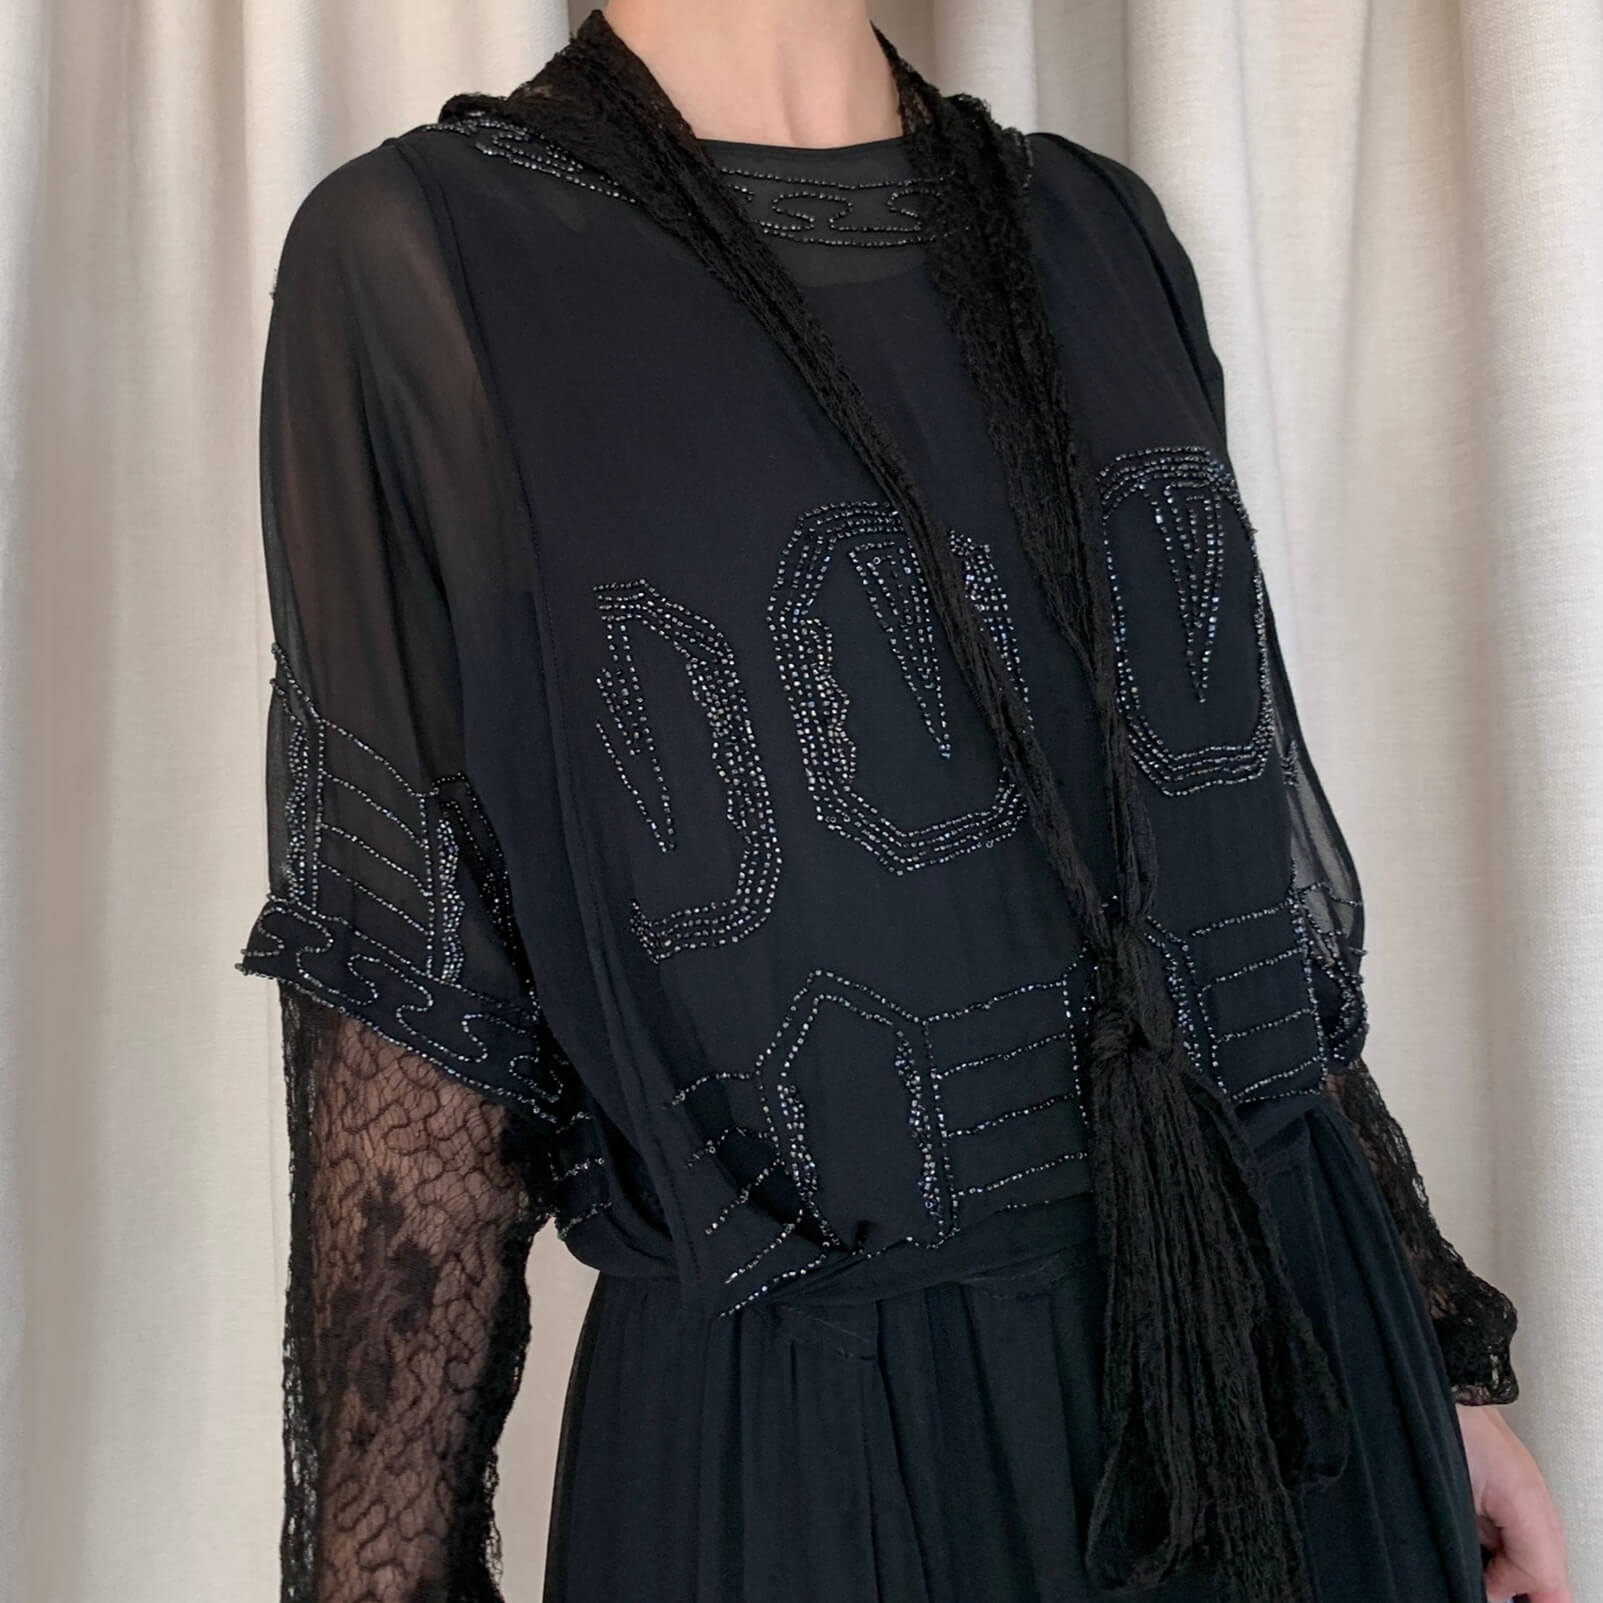 1920s beaded gown detail with black glass beads on silk chiffon